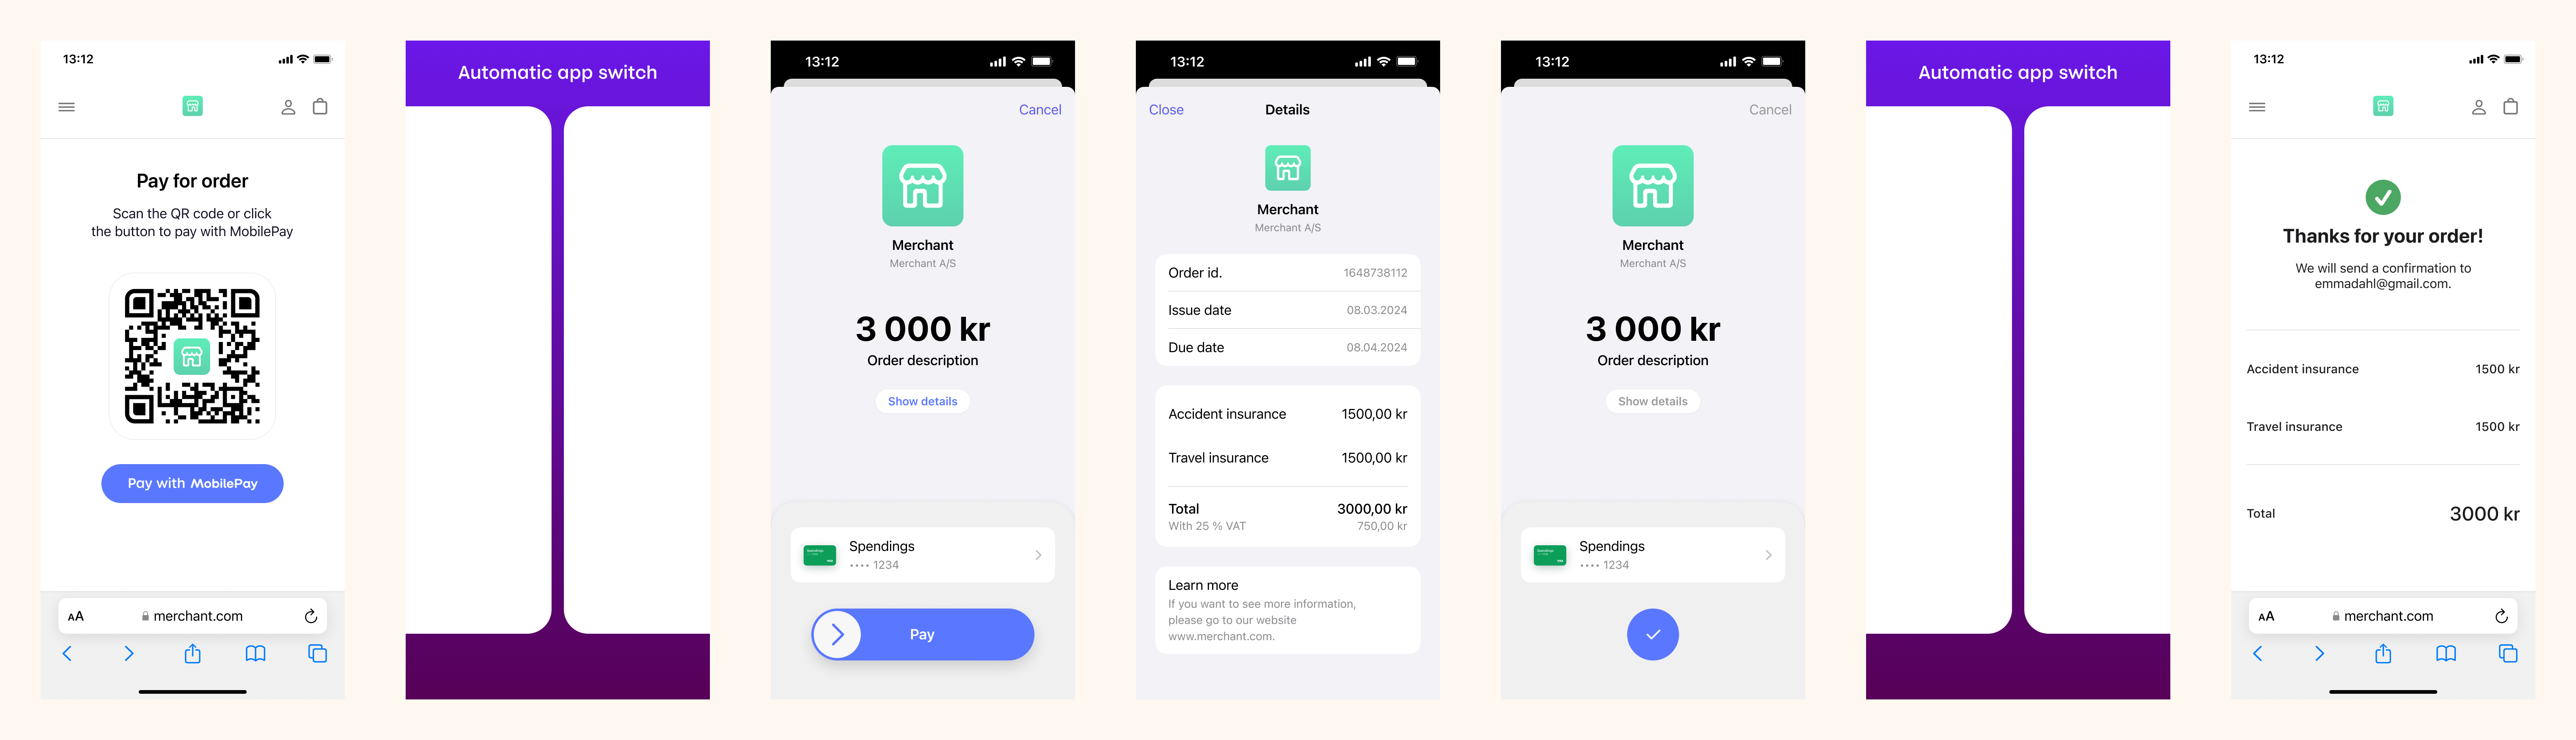 MobilePay payment request landing page flow